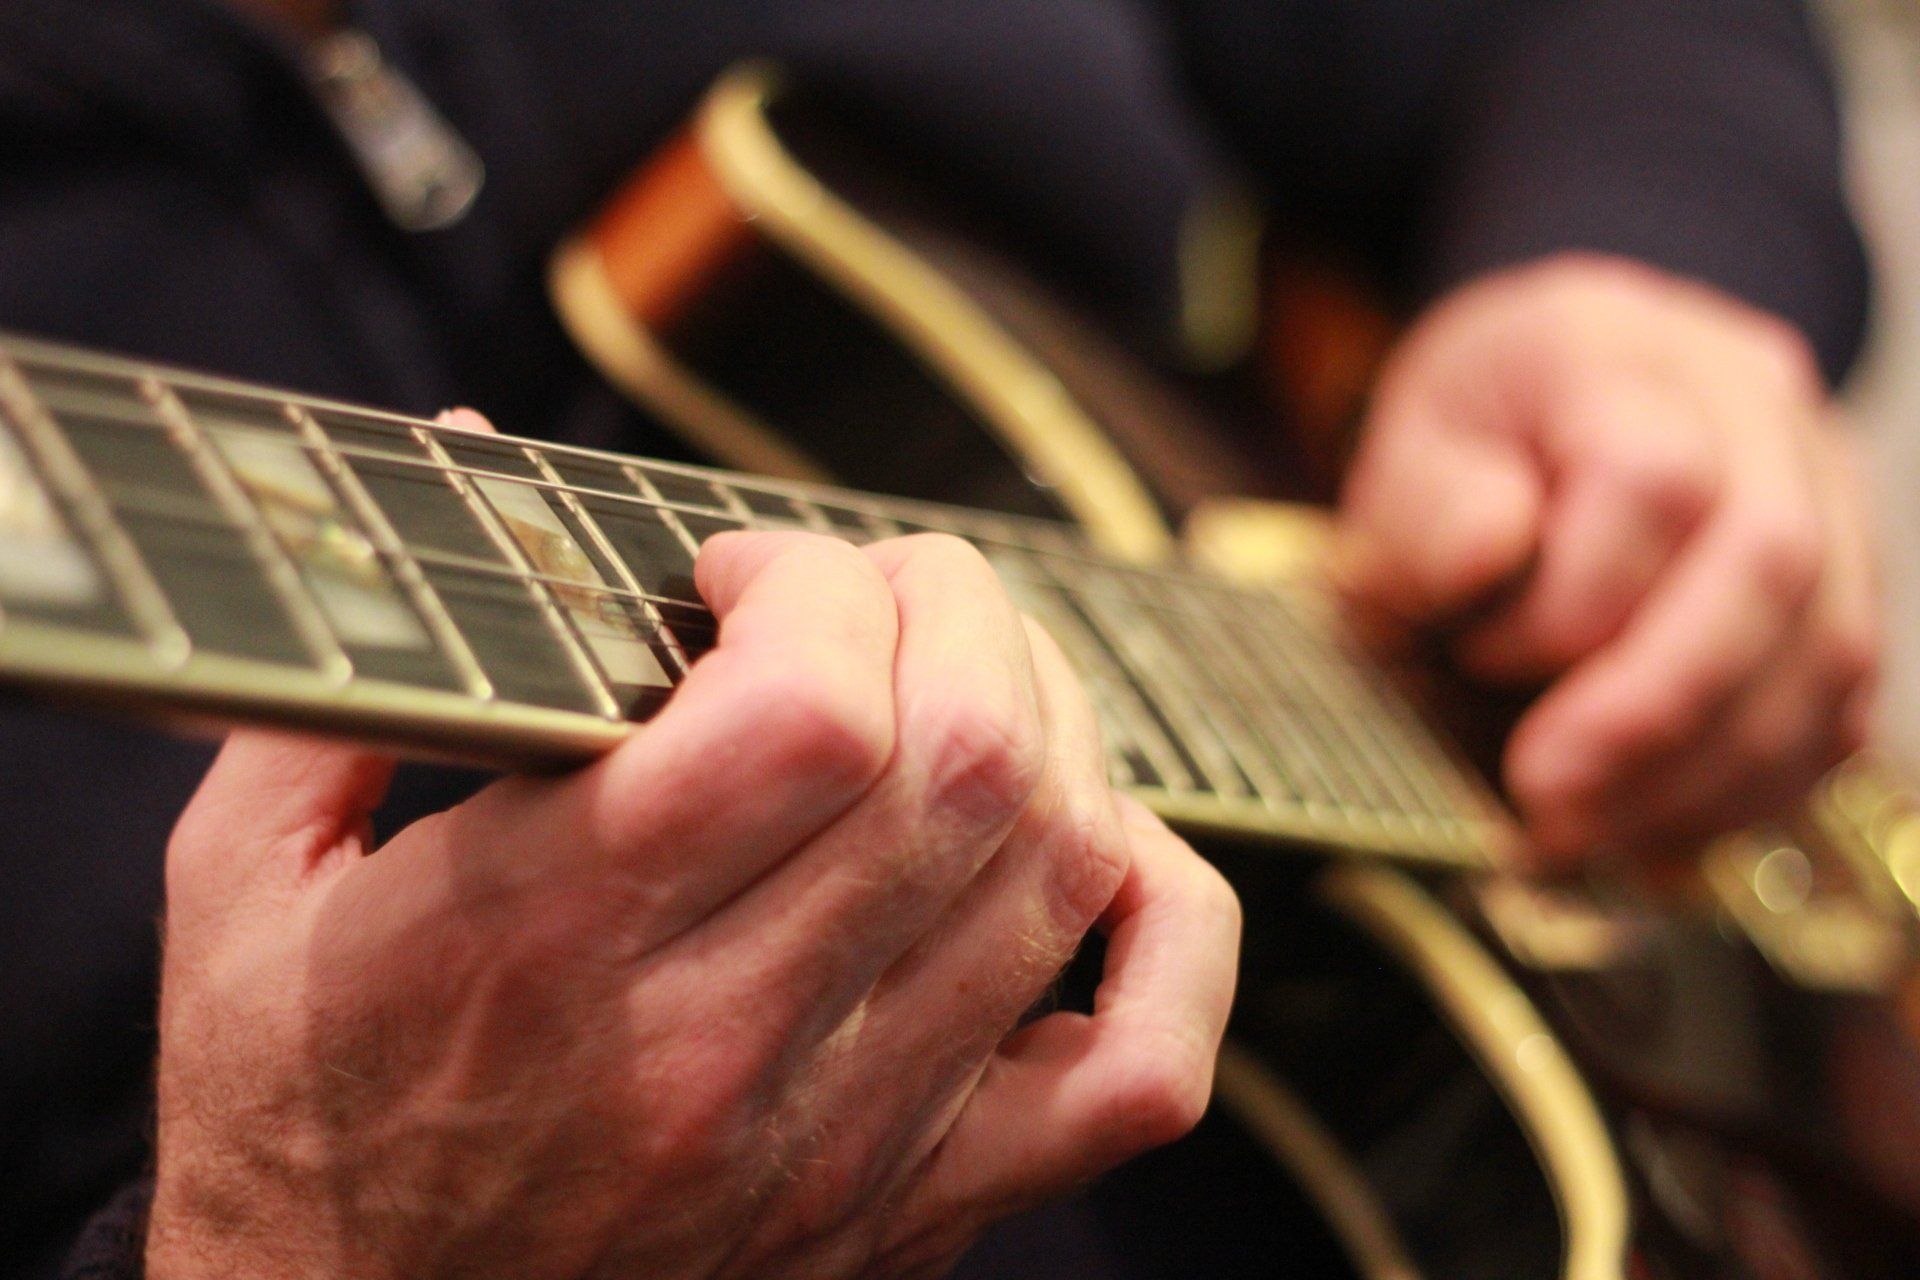 A guitarist's hand on the fretboard